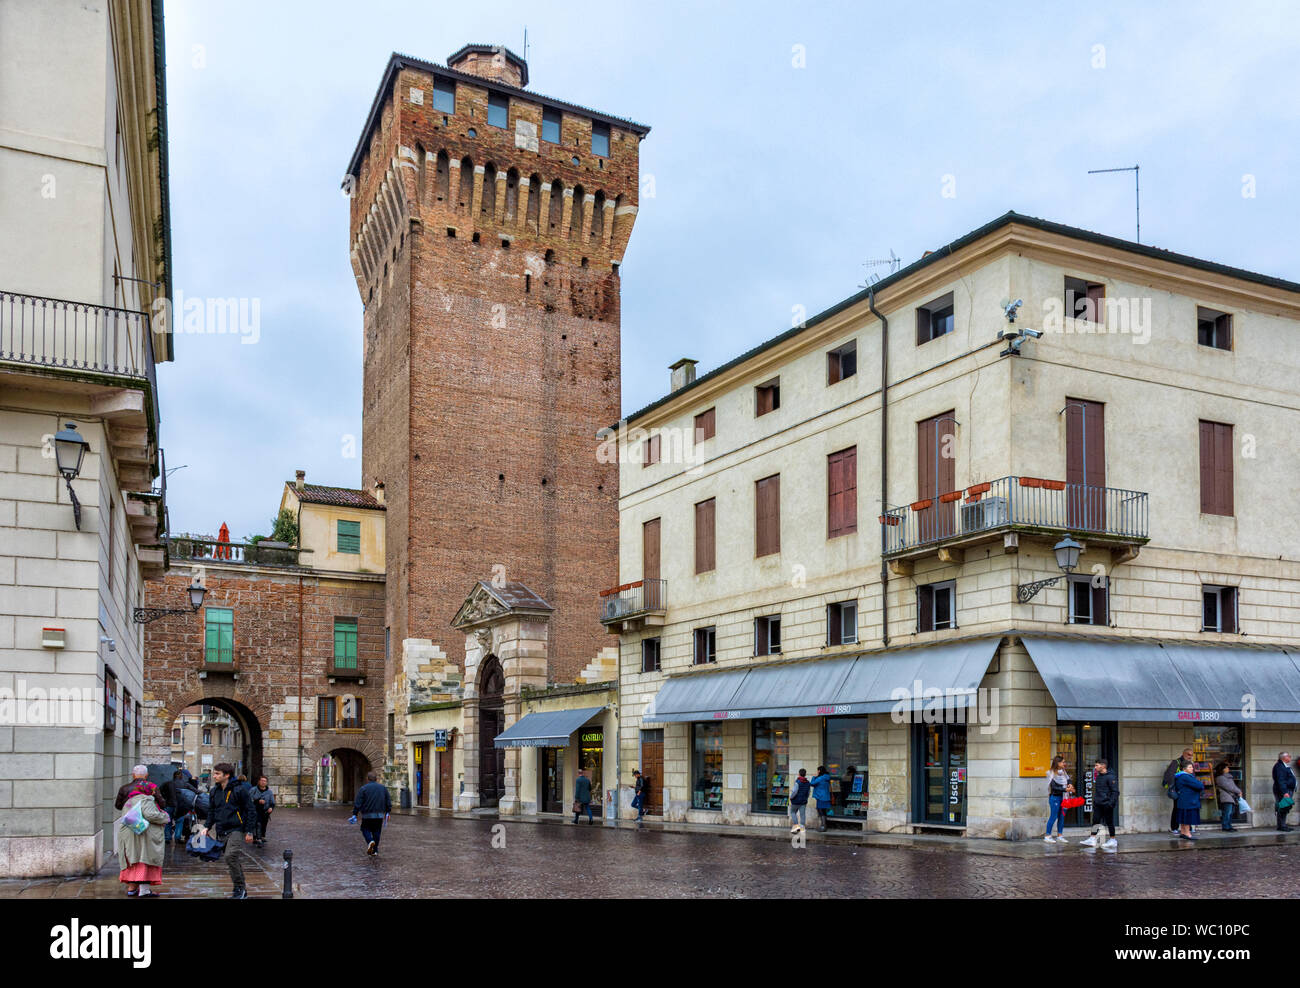 The Scaliger Tower at Porta Castello, from the Piazza Costello, Vicenza, Veneto, Italy Stock Photo